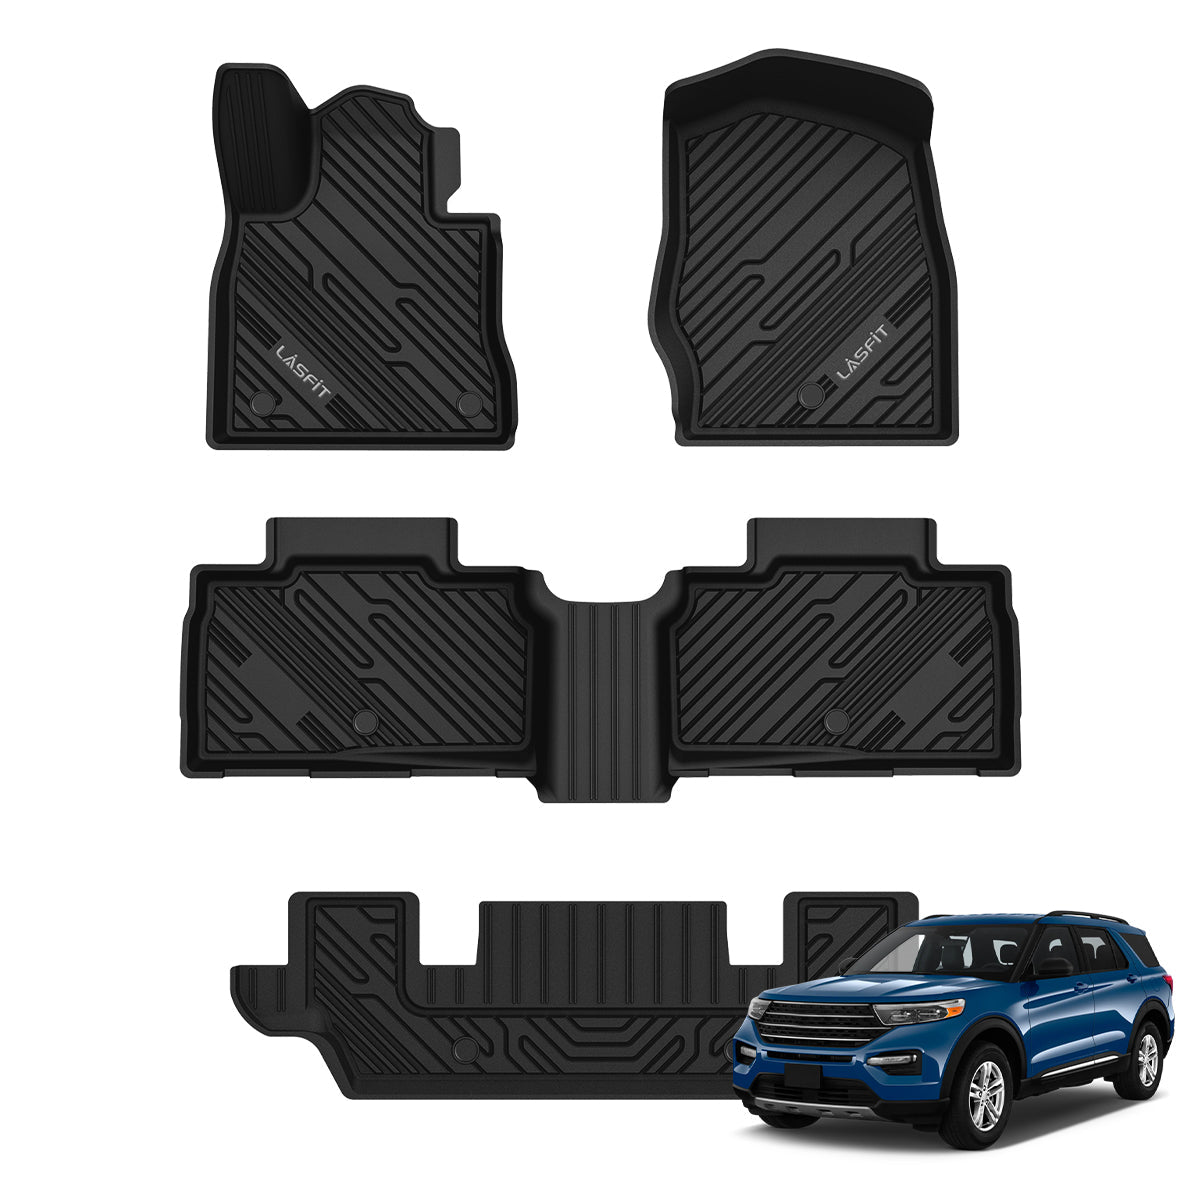 For Family SUV – LASFIT LINERS